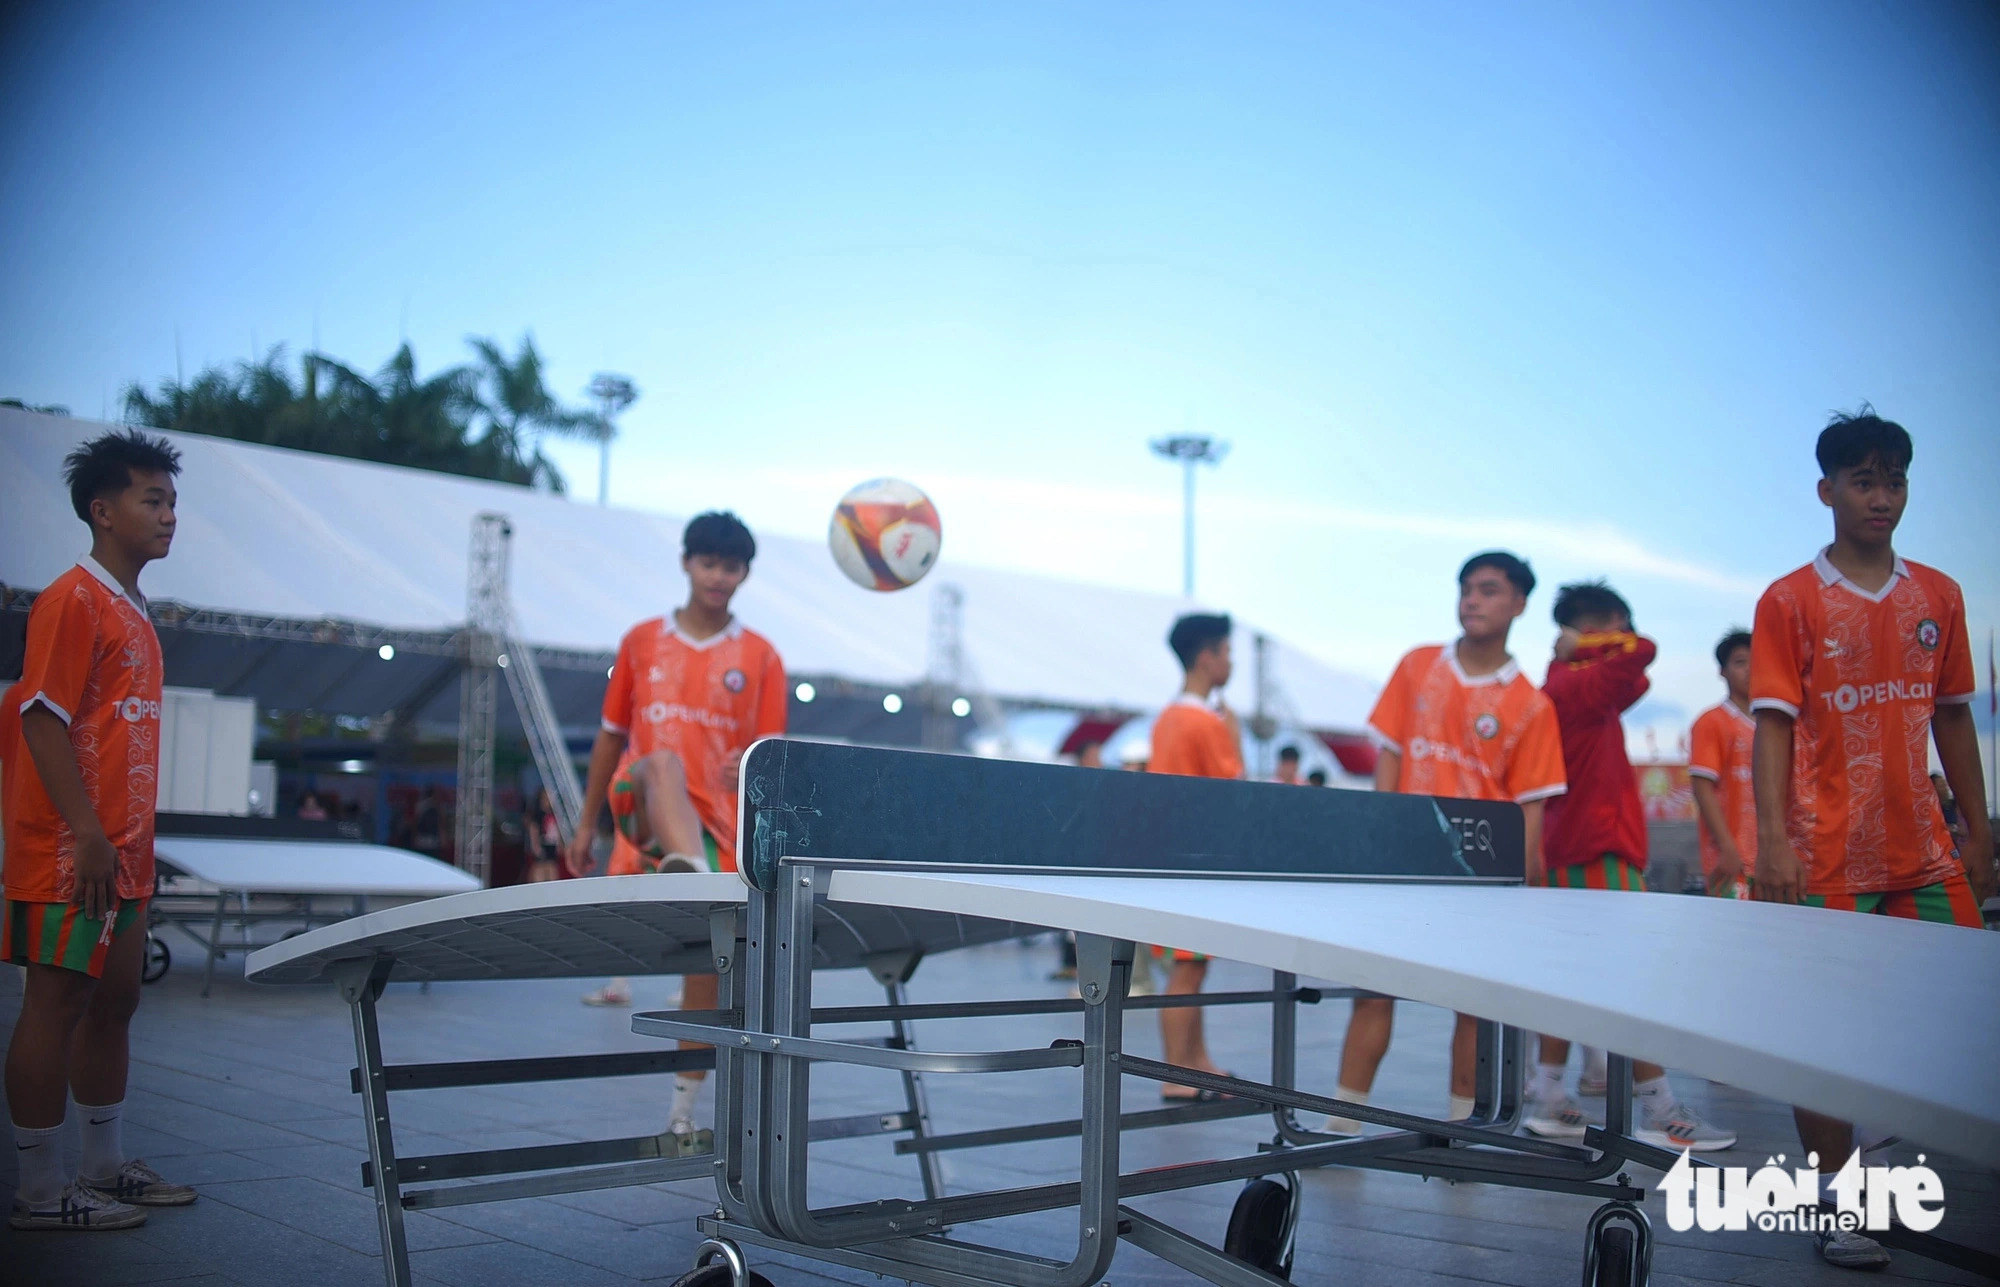 A group of teen boys play teqball on a curved table. Photo: Lam Thien / Tuoi Tre